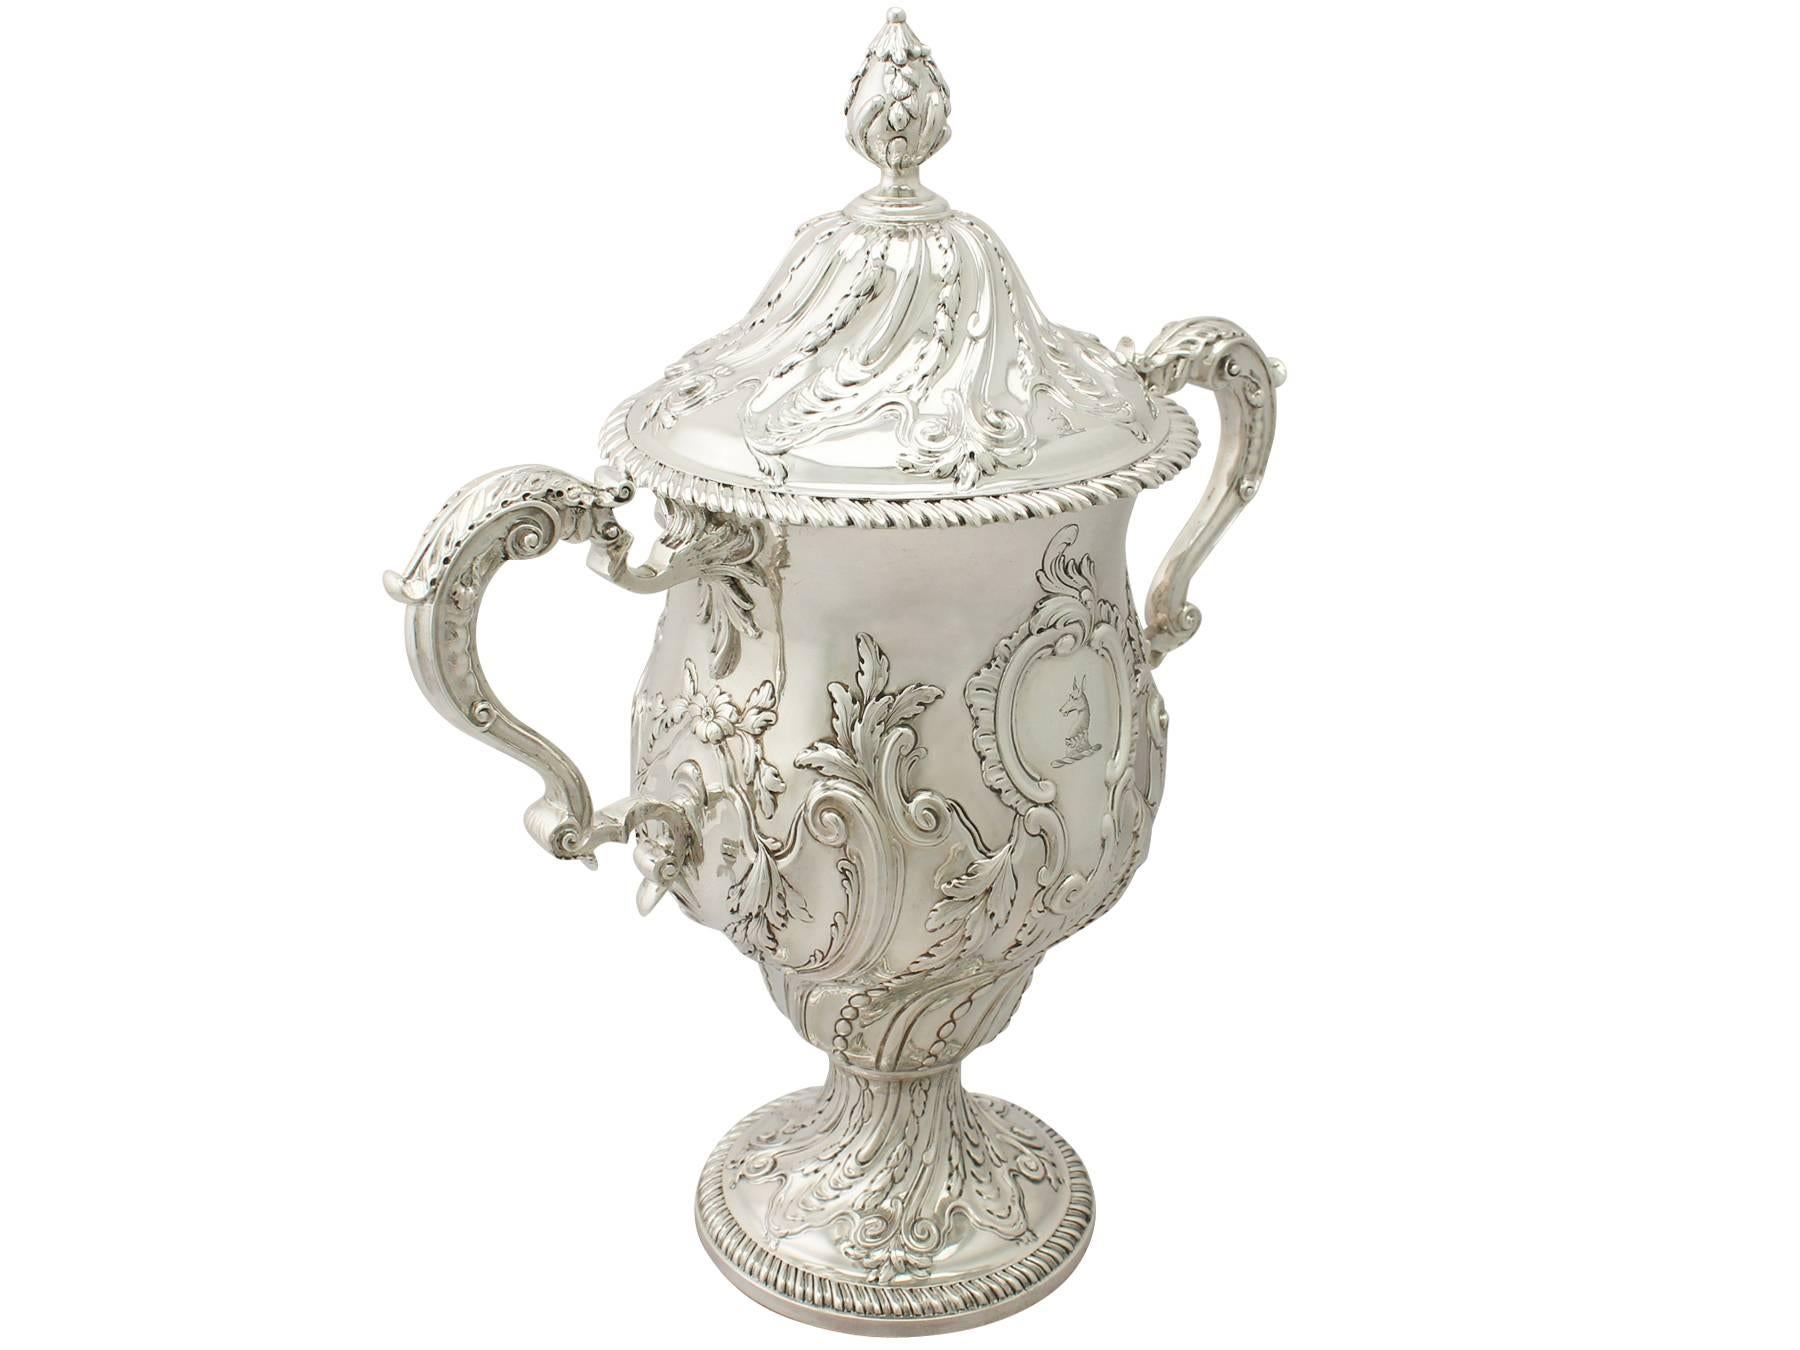 A magnificent, fine and impressive antique George III English sterling silver cup and cover, an addition to our Georgian silverware collection

This magnificent antique George III sterling silver cup and cover has a campania shaped form to a